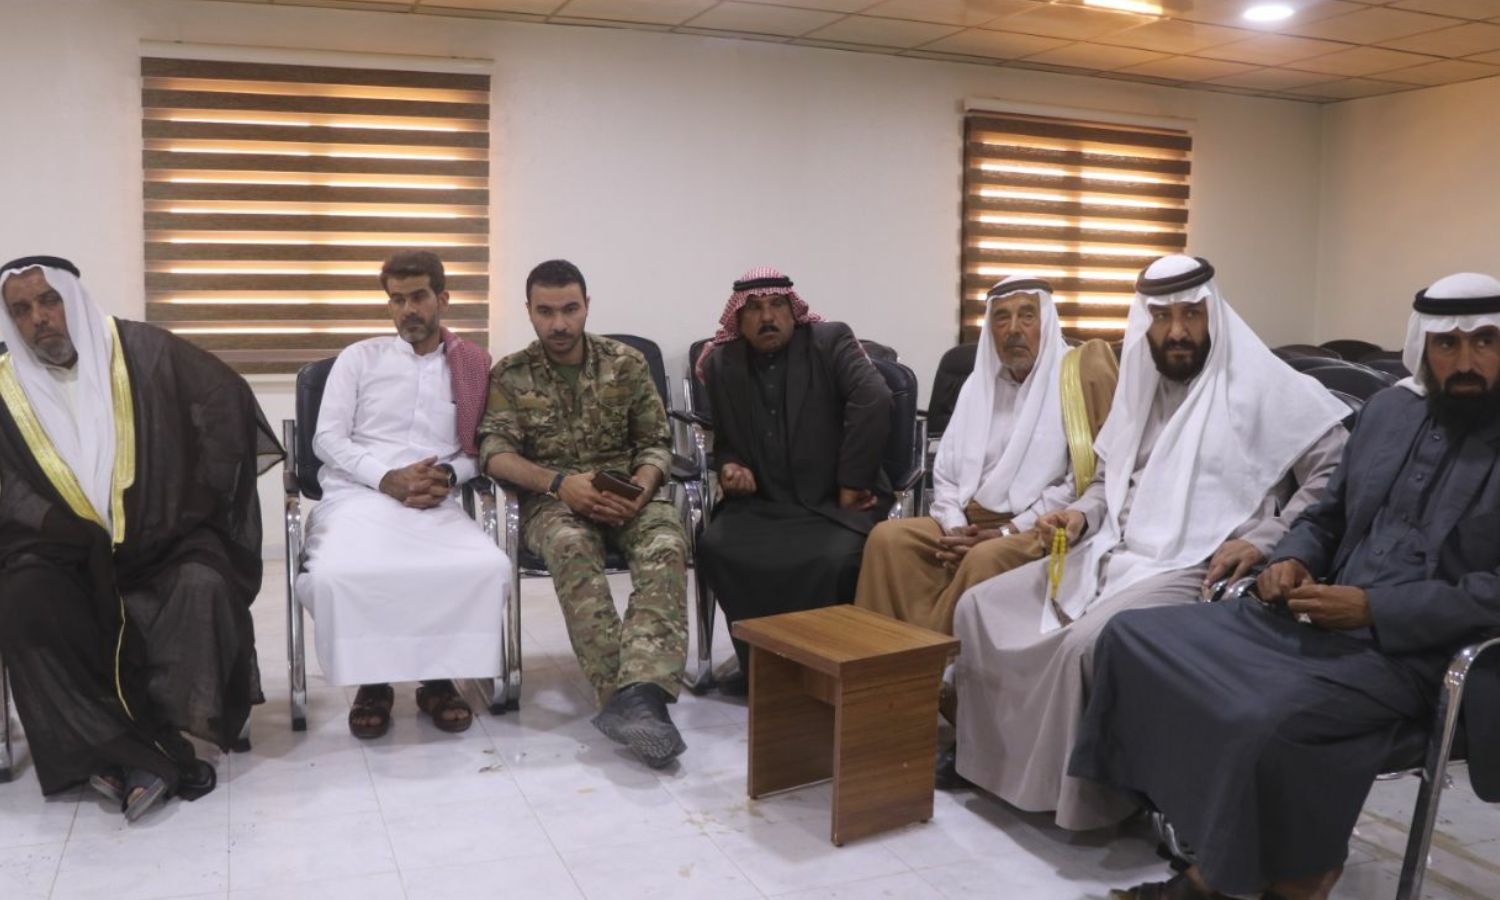 Representatives of the International Coalition during their meeting with representatives of the security forces and tribal figures and notables in Deir Ezzor - 25 June 2021 (Deir Ezzor Media Center/Facebook)